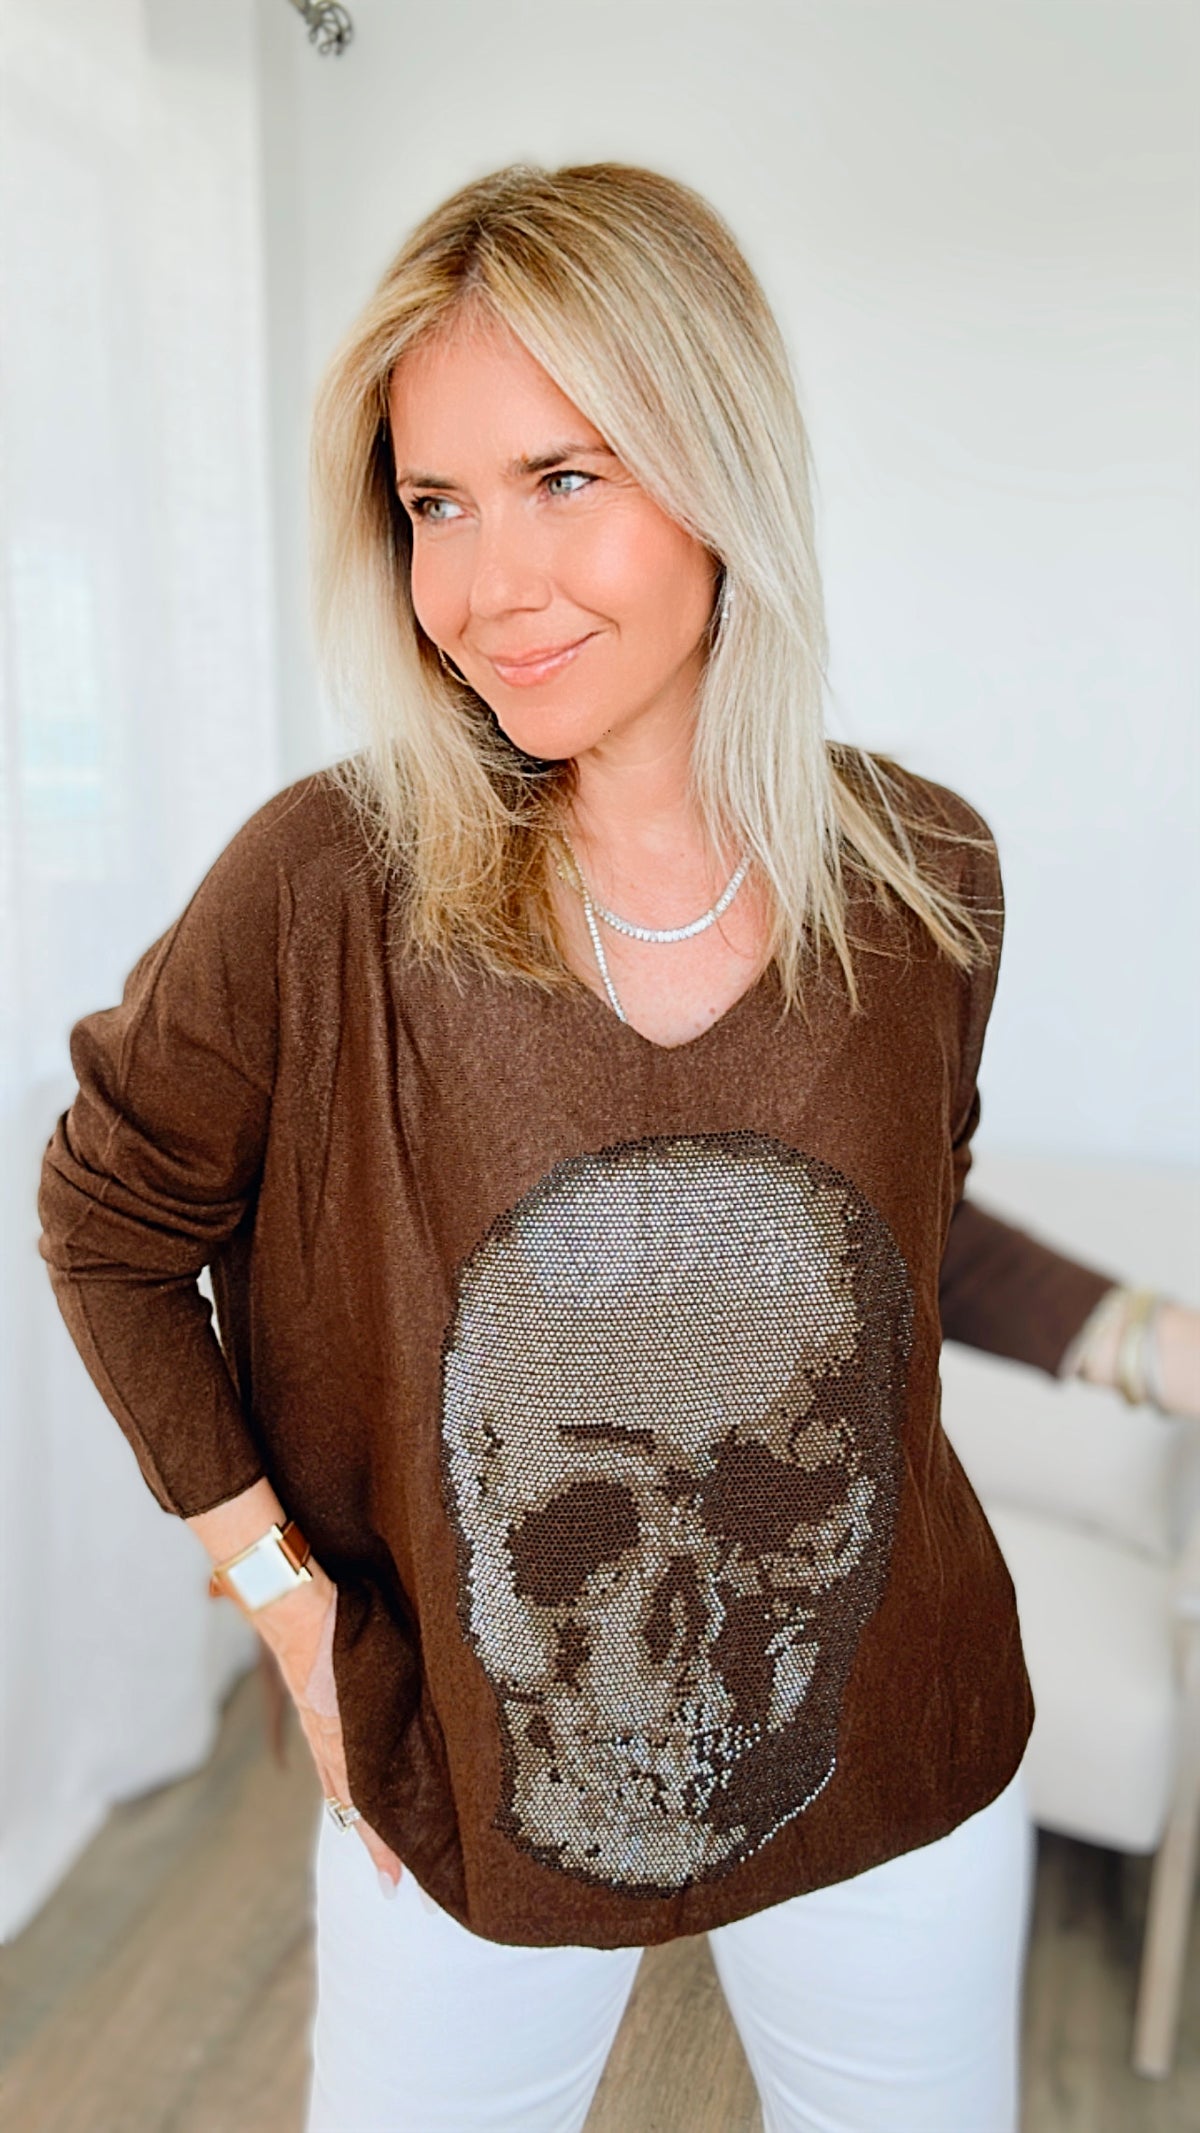 Italian Cz Skull V-Neck Knit Top - Chocolate-130 Long Sleeve Tops-Venti6-Coastal Bloom Boutique, find the trendiest versions of the popular styles and looks Located in Indialantic, FL